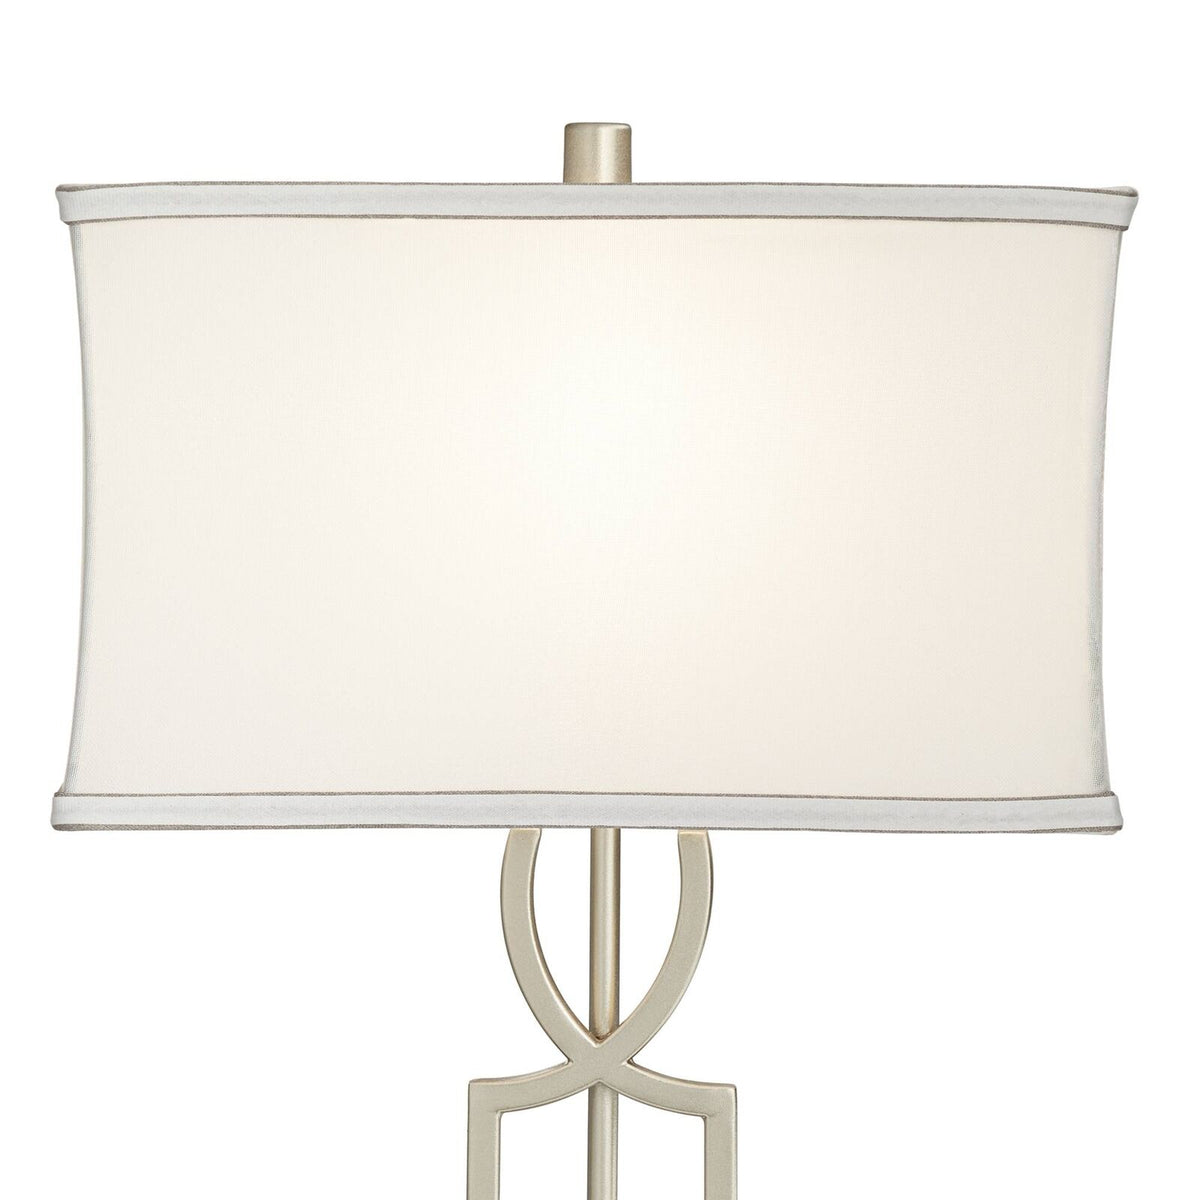 Modern Table Lamps Set of 2 With Brushed Nickel Finish And USB Ports